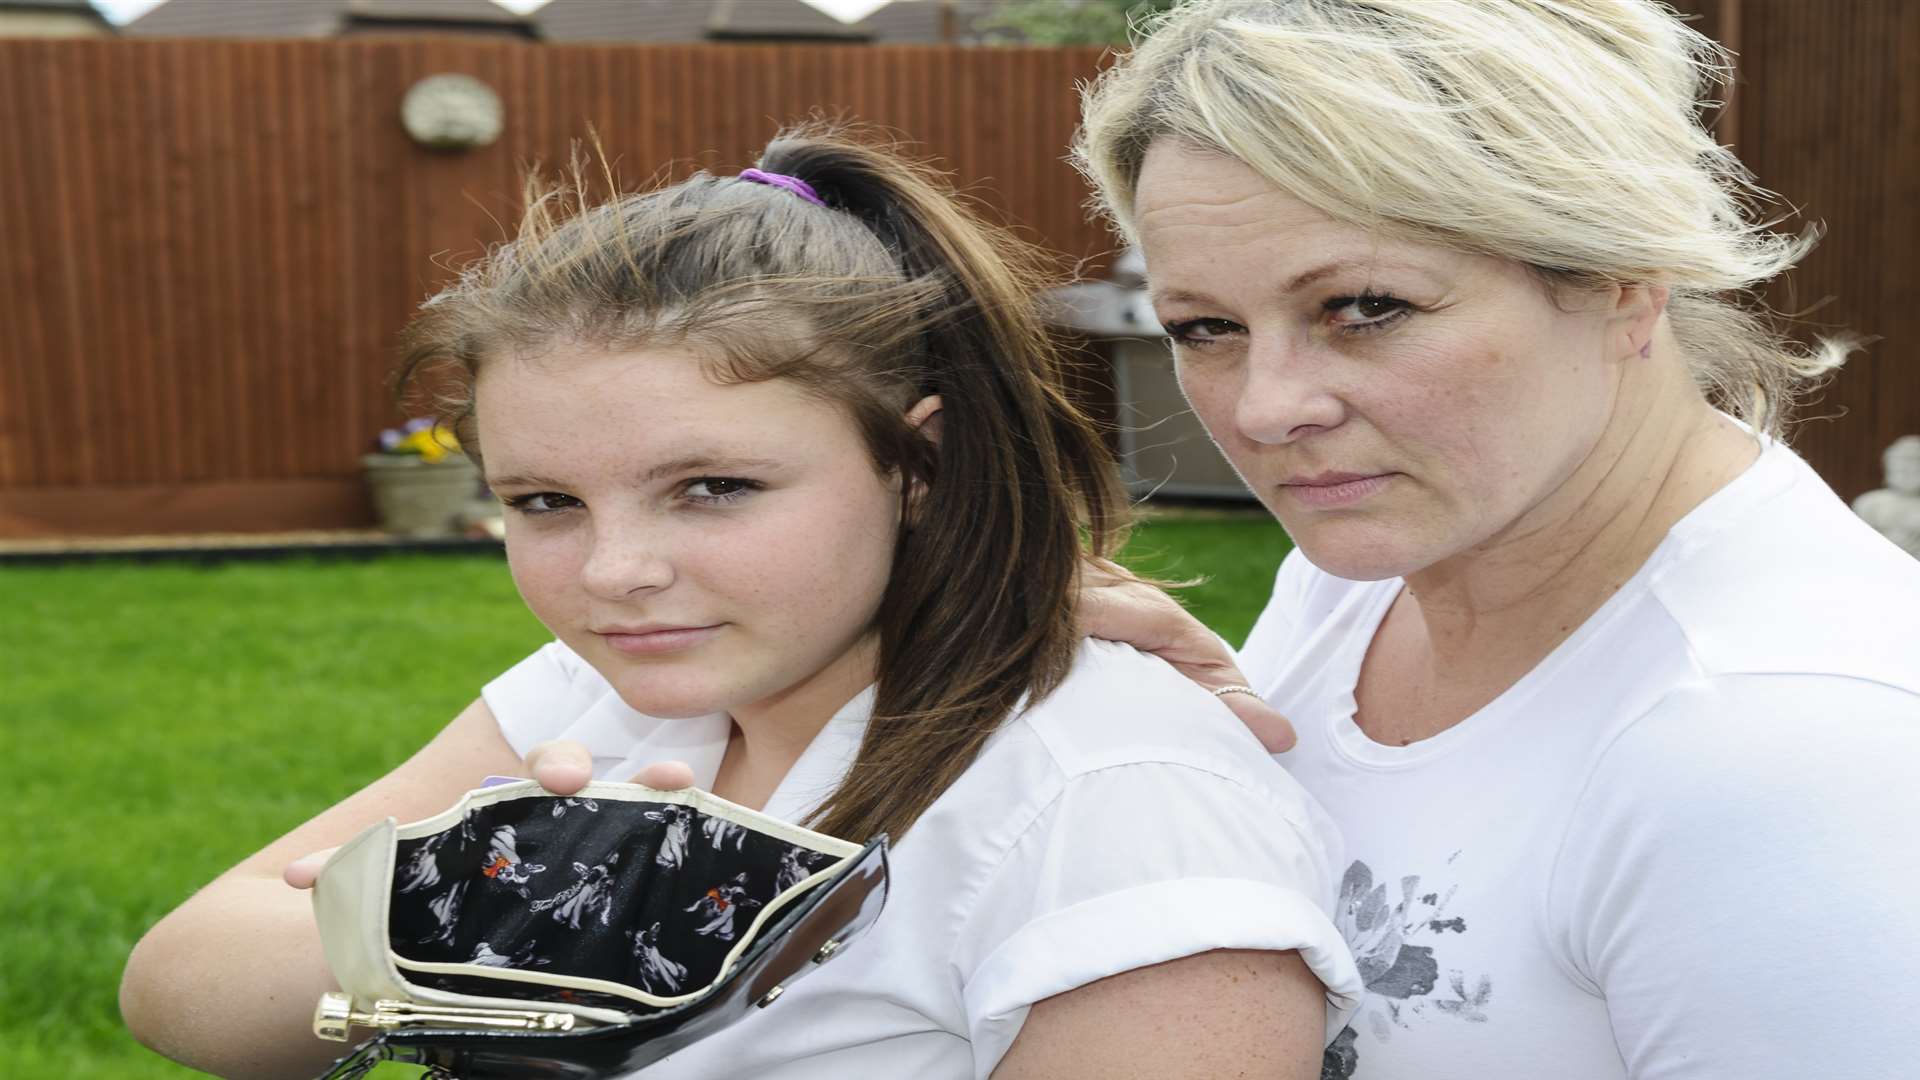 Elli Baker, 14, of Beaumont Road, Maidstone, was mugged in Barming Park for the money in her purse. She is pictured with her mother Michelle Baker. Picture: Andy Payton FM4778885